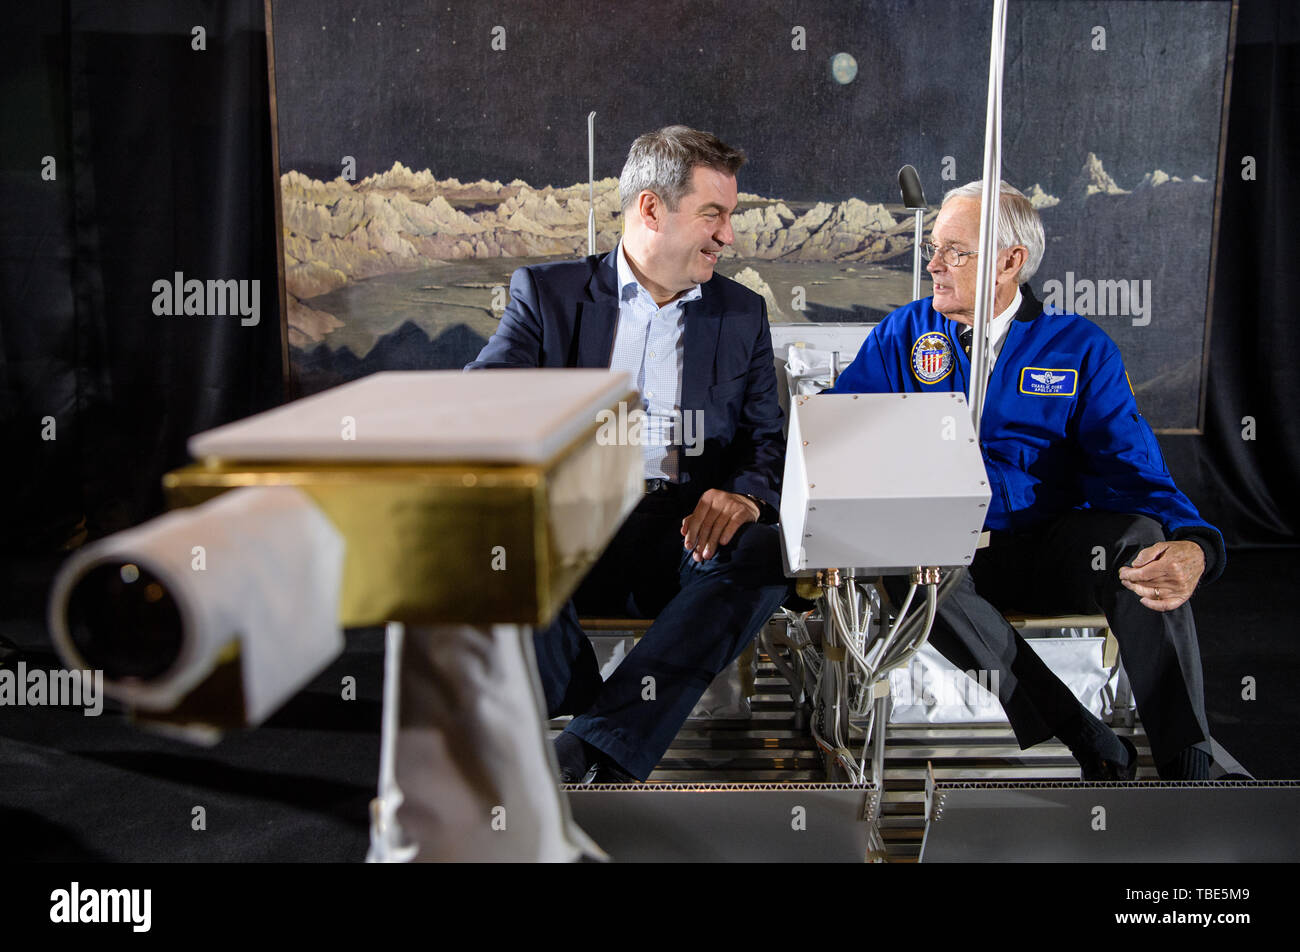 Munich, Germany. 01st June, 2019. Markus Söder (CSU, l), Prime Minister of Bavaria, and Charlie Duke, former US astronaut, are sitting in a replica of a moon car (Lunar Roving Vehicle) in the German Museum as part of an event marking the 50th anniversary of the moon landing. In the background you can see the oil painting 'Ideal Moon Landscape' from 1919 by Wilhelm Kranz. Duke is one of four people who were on the moon and can still talk about it. Credit: Matthias Balk/dpa/Alamy Live News Stock Photo